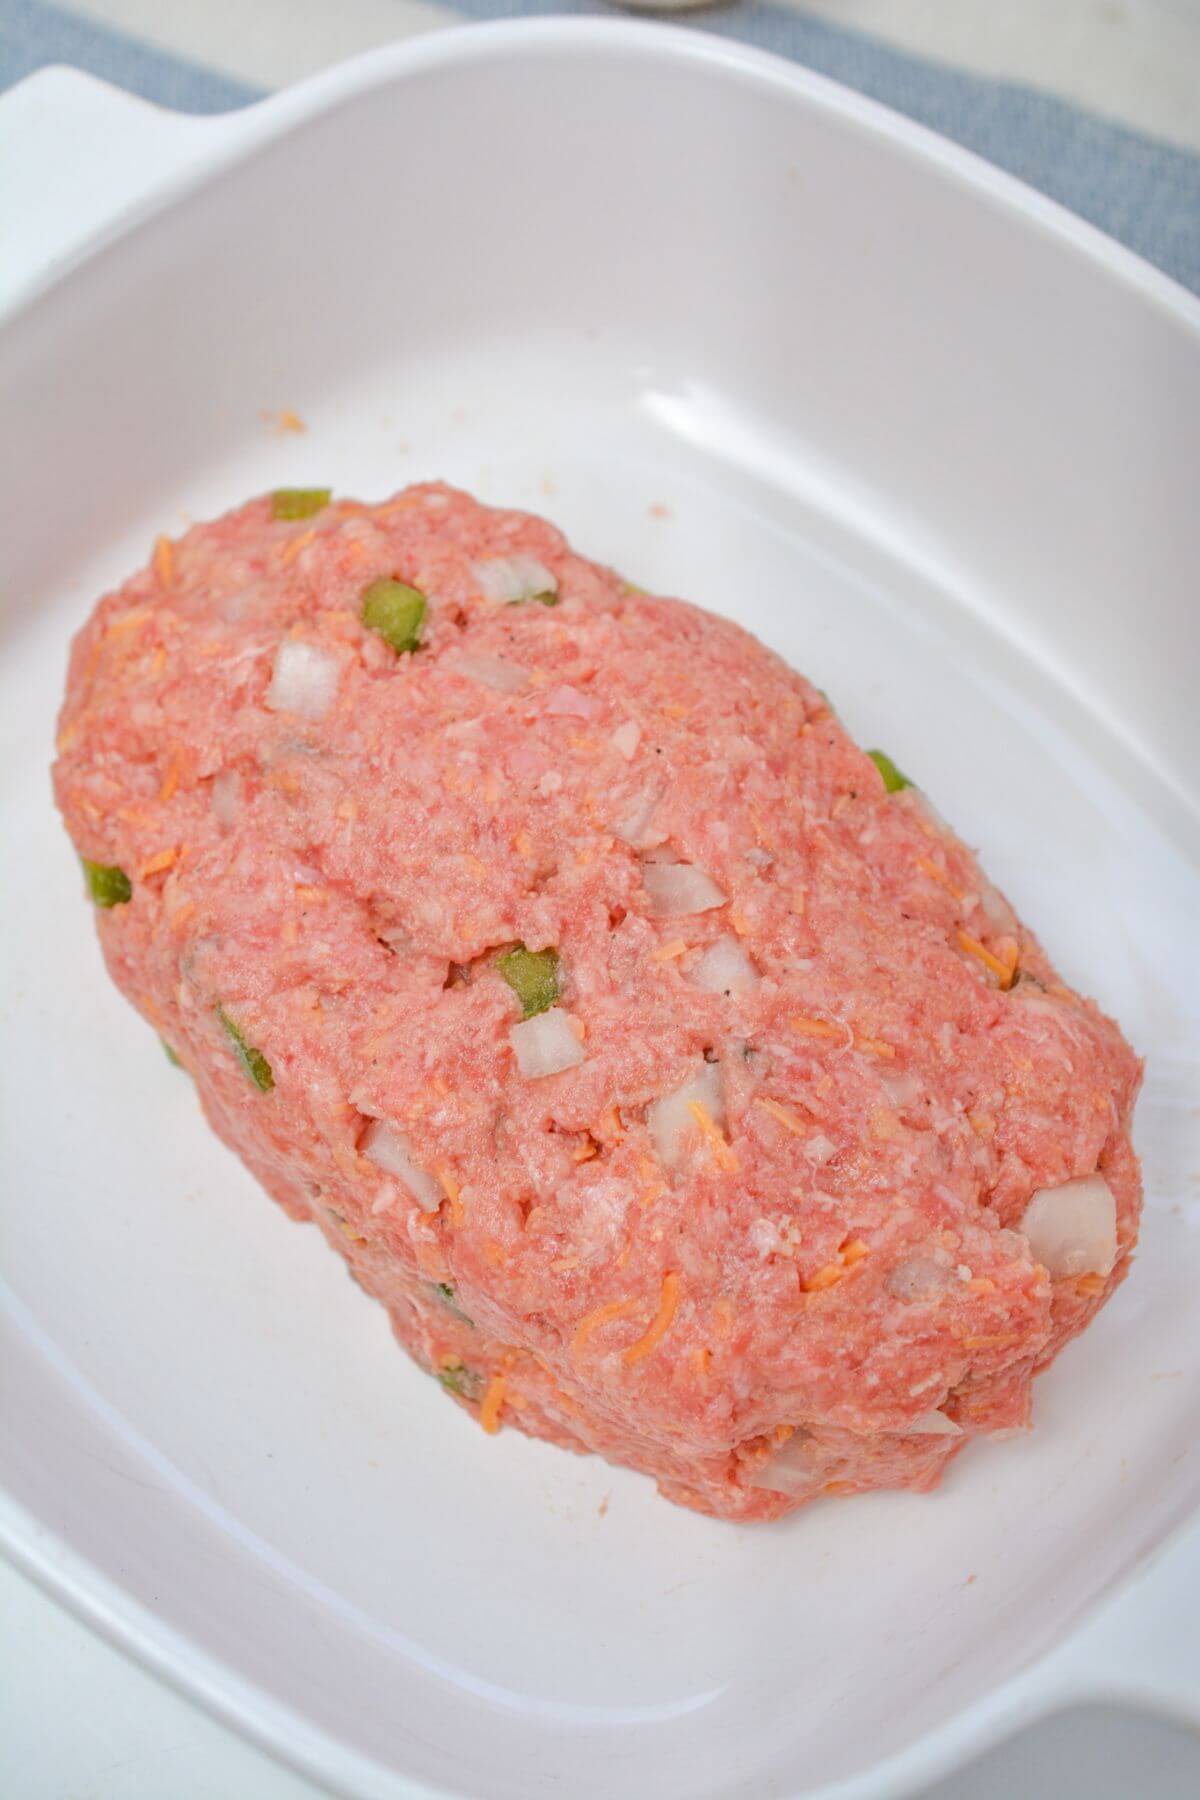 Uncooked meatloaf in a white dish.